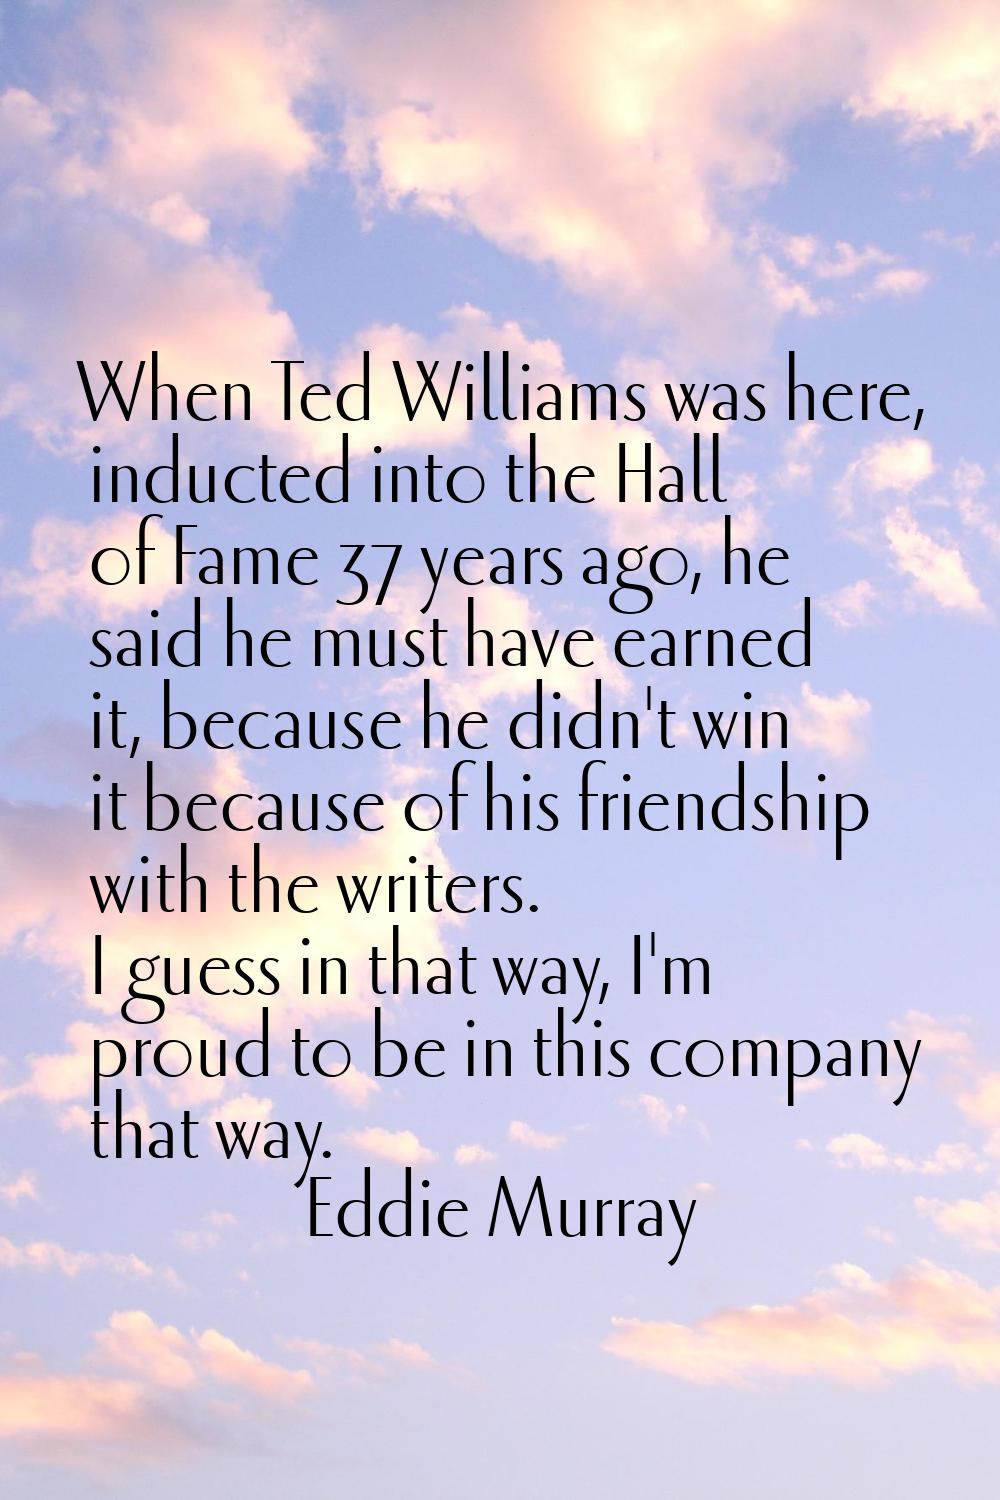 When Ted Williams was here, inducted into the Hall of Fame 37 years ago, he said he must have earne